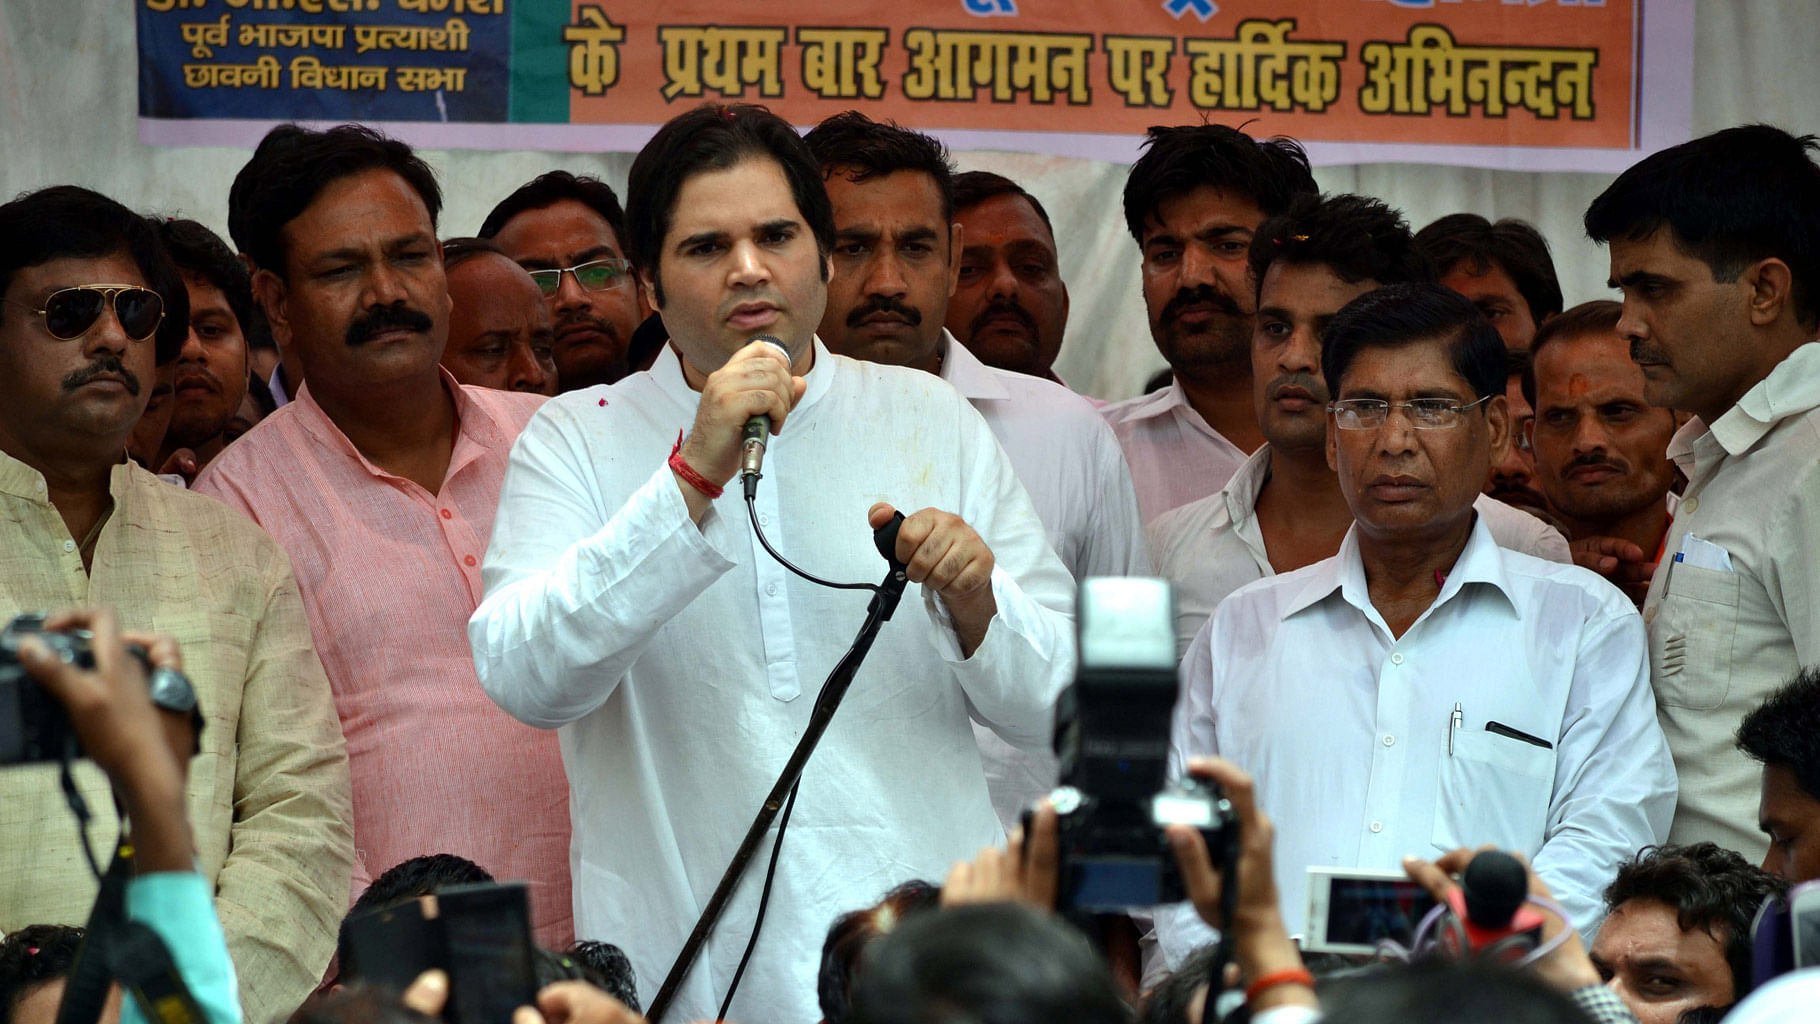 

 BJP’s Sultanpur MP Varun Gandhi addressing  a public meeting in Agra on July 5, 2015. (Photo: IANS)